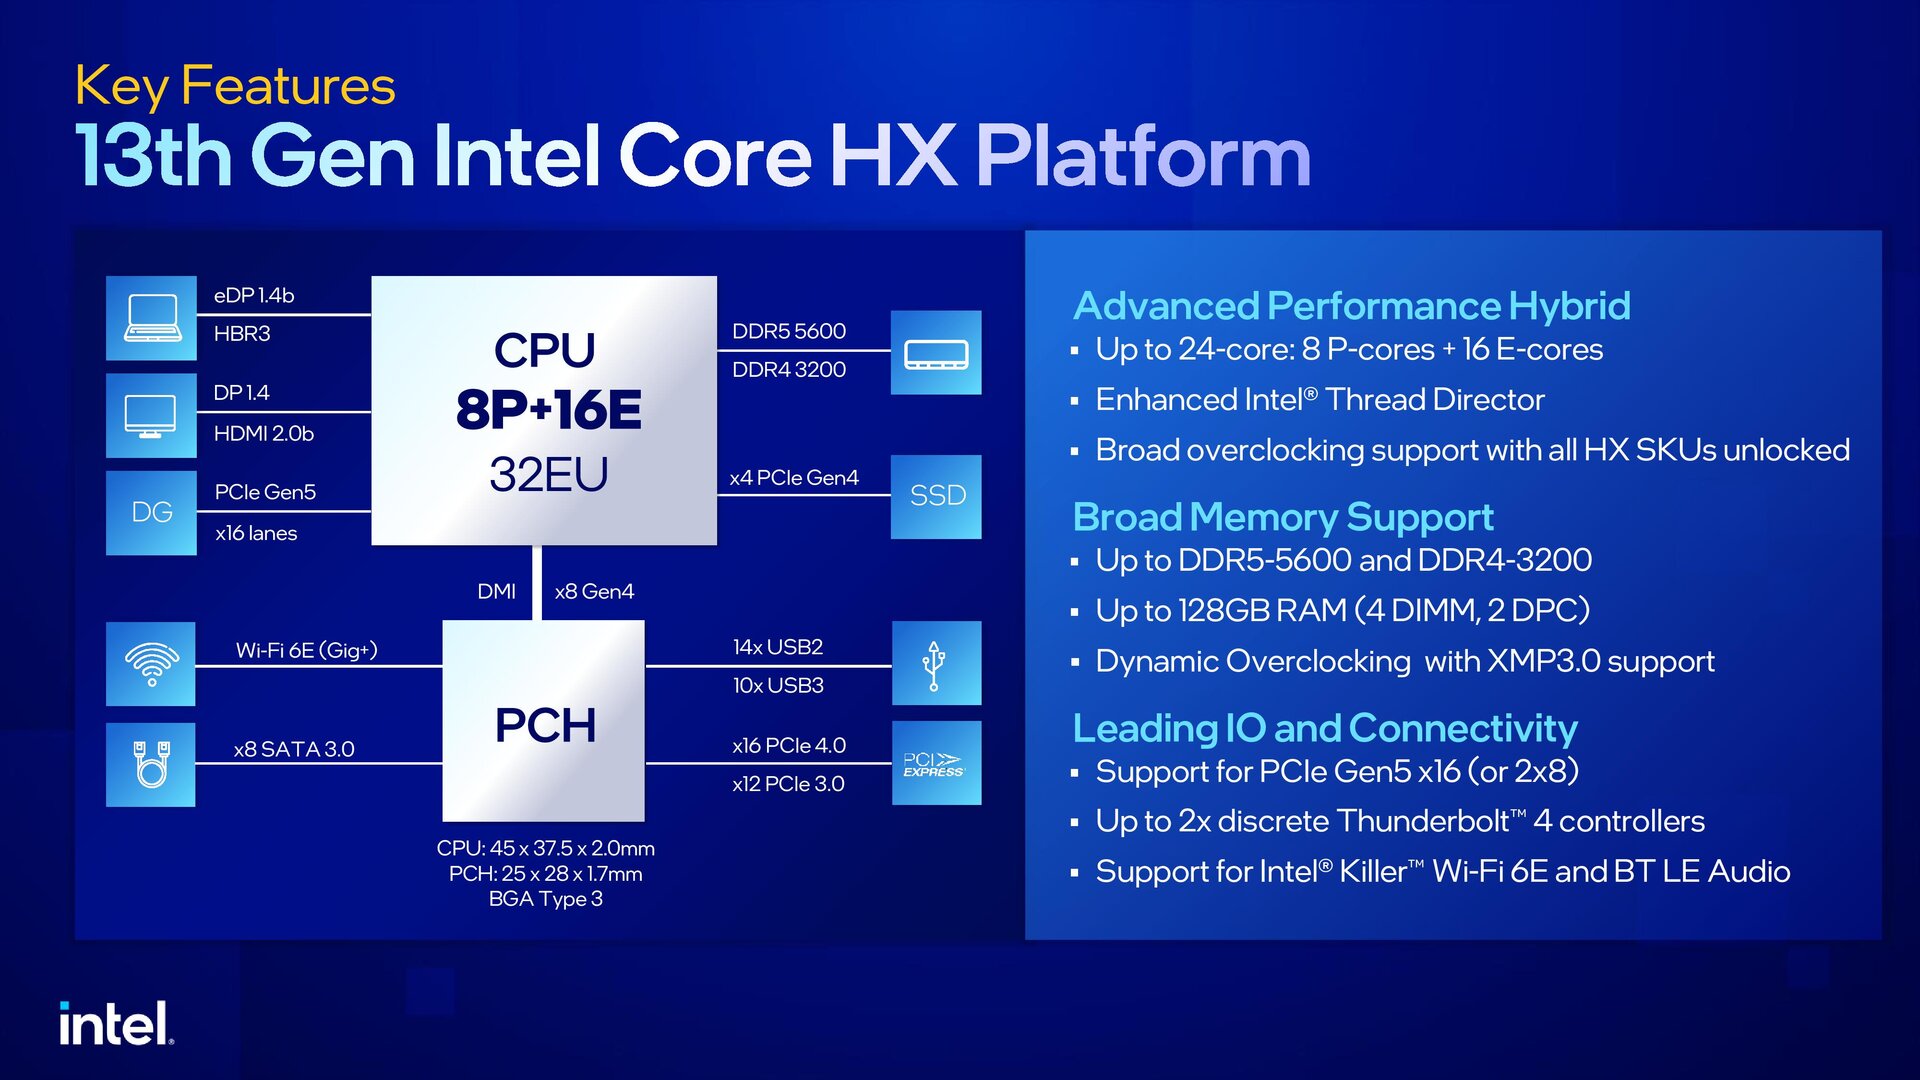 Intel's 13th generation core offers up to 24 cores in the HX series